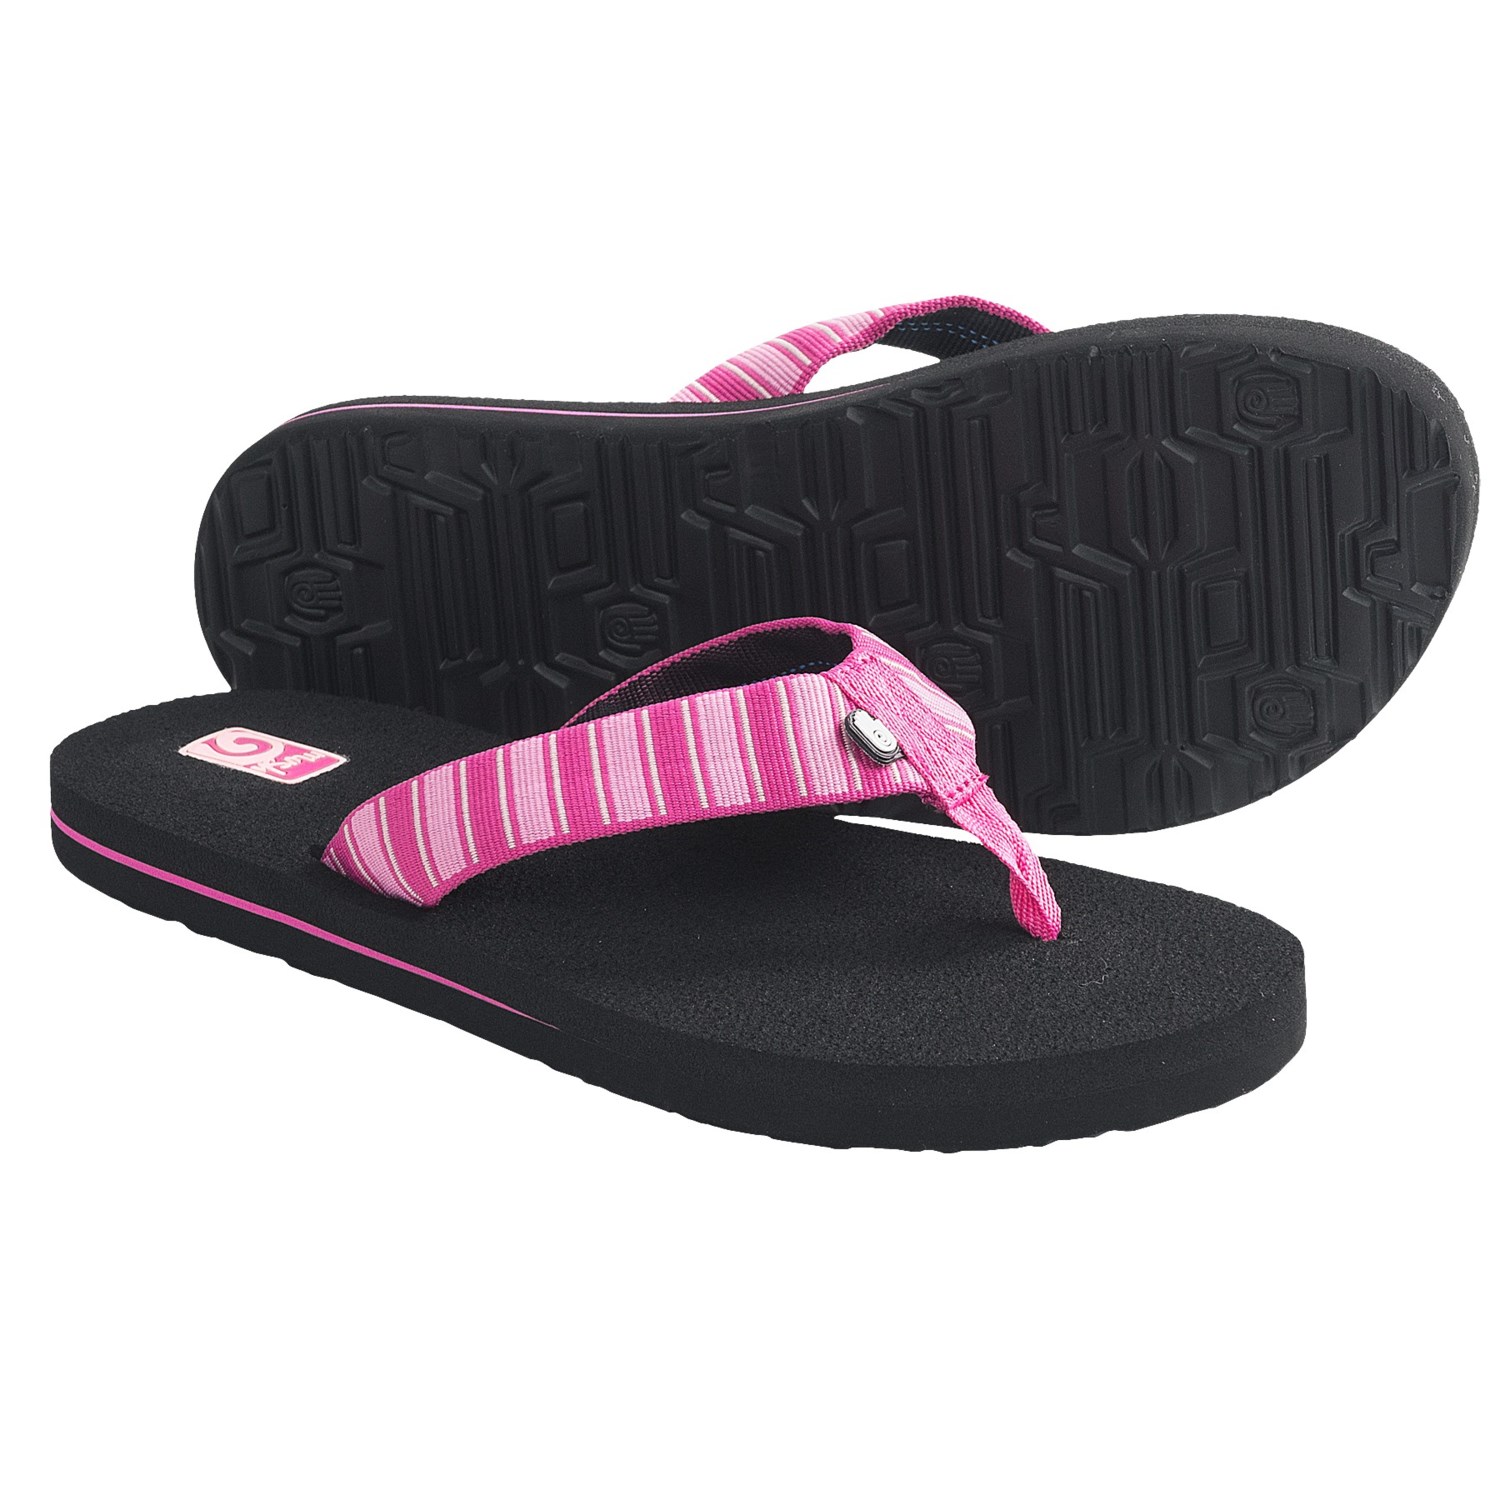 Teva Sandals For Toddlers ~ Outdoor Sandals